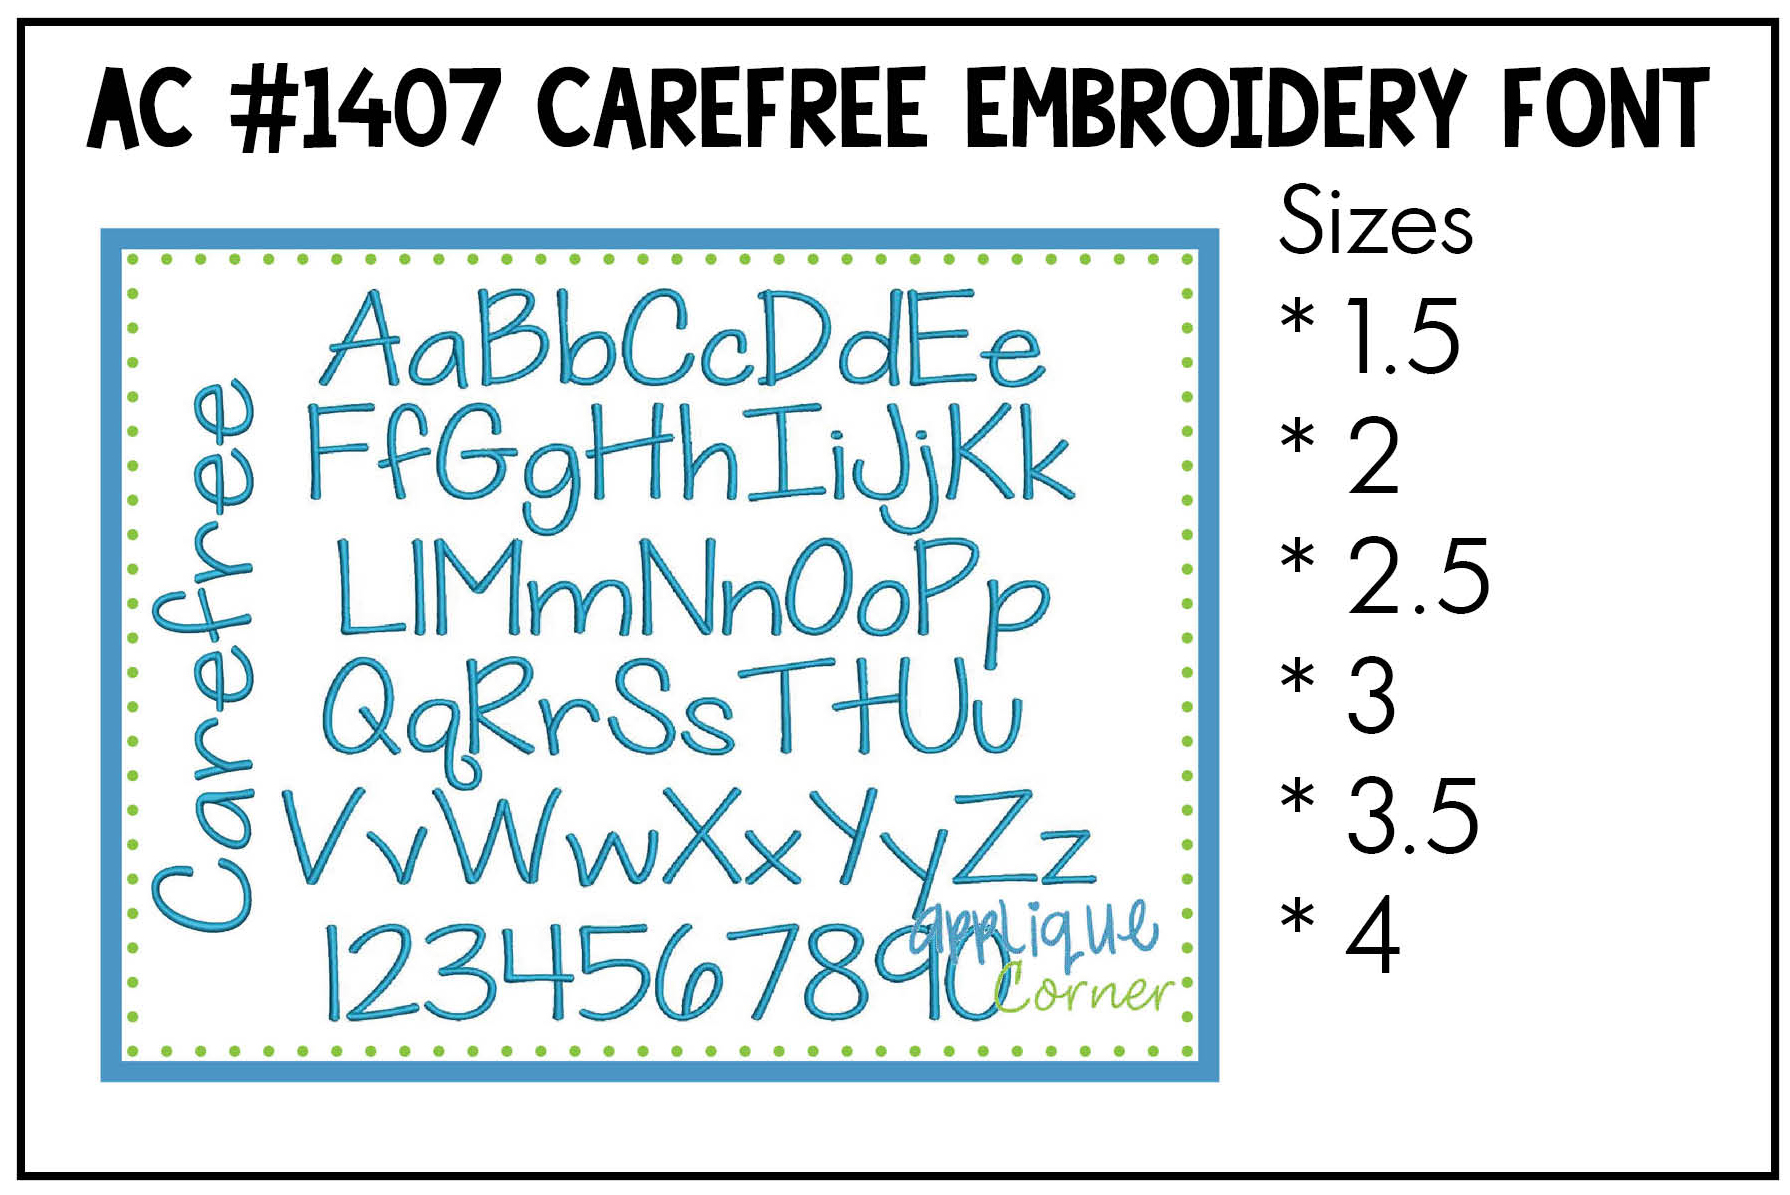 Carefree Embroidery Font